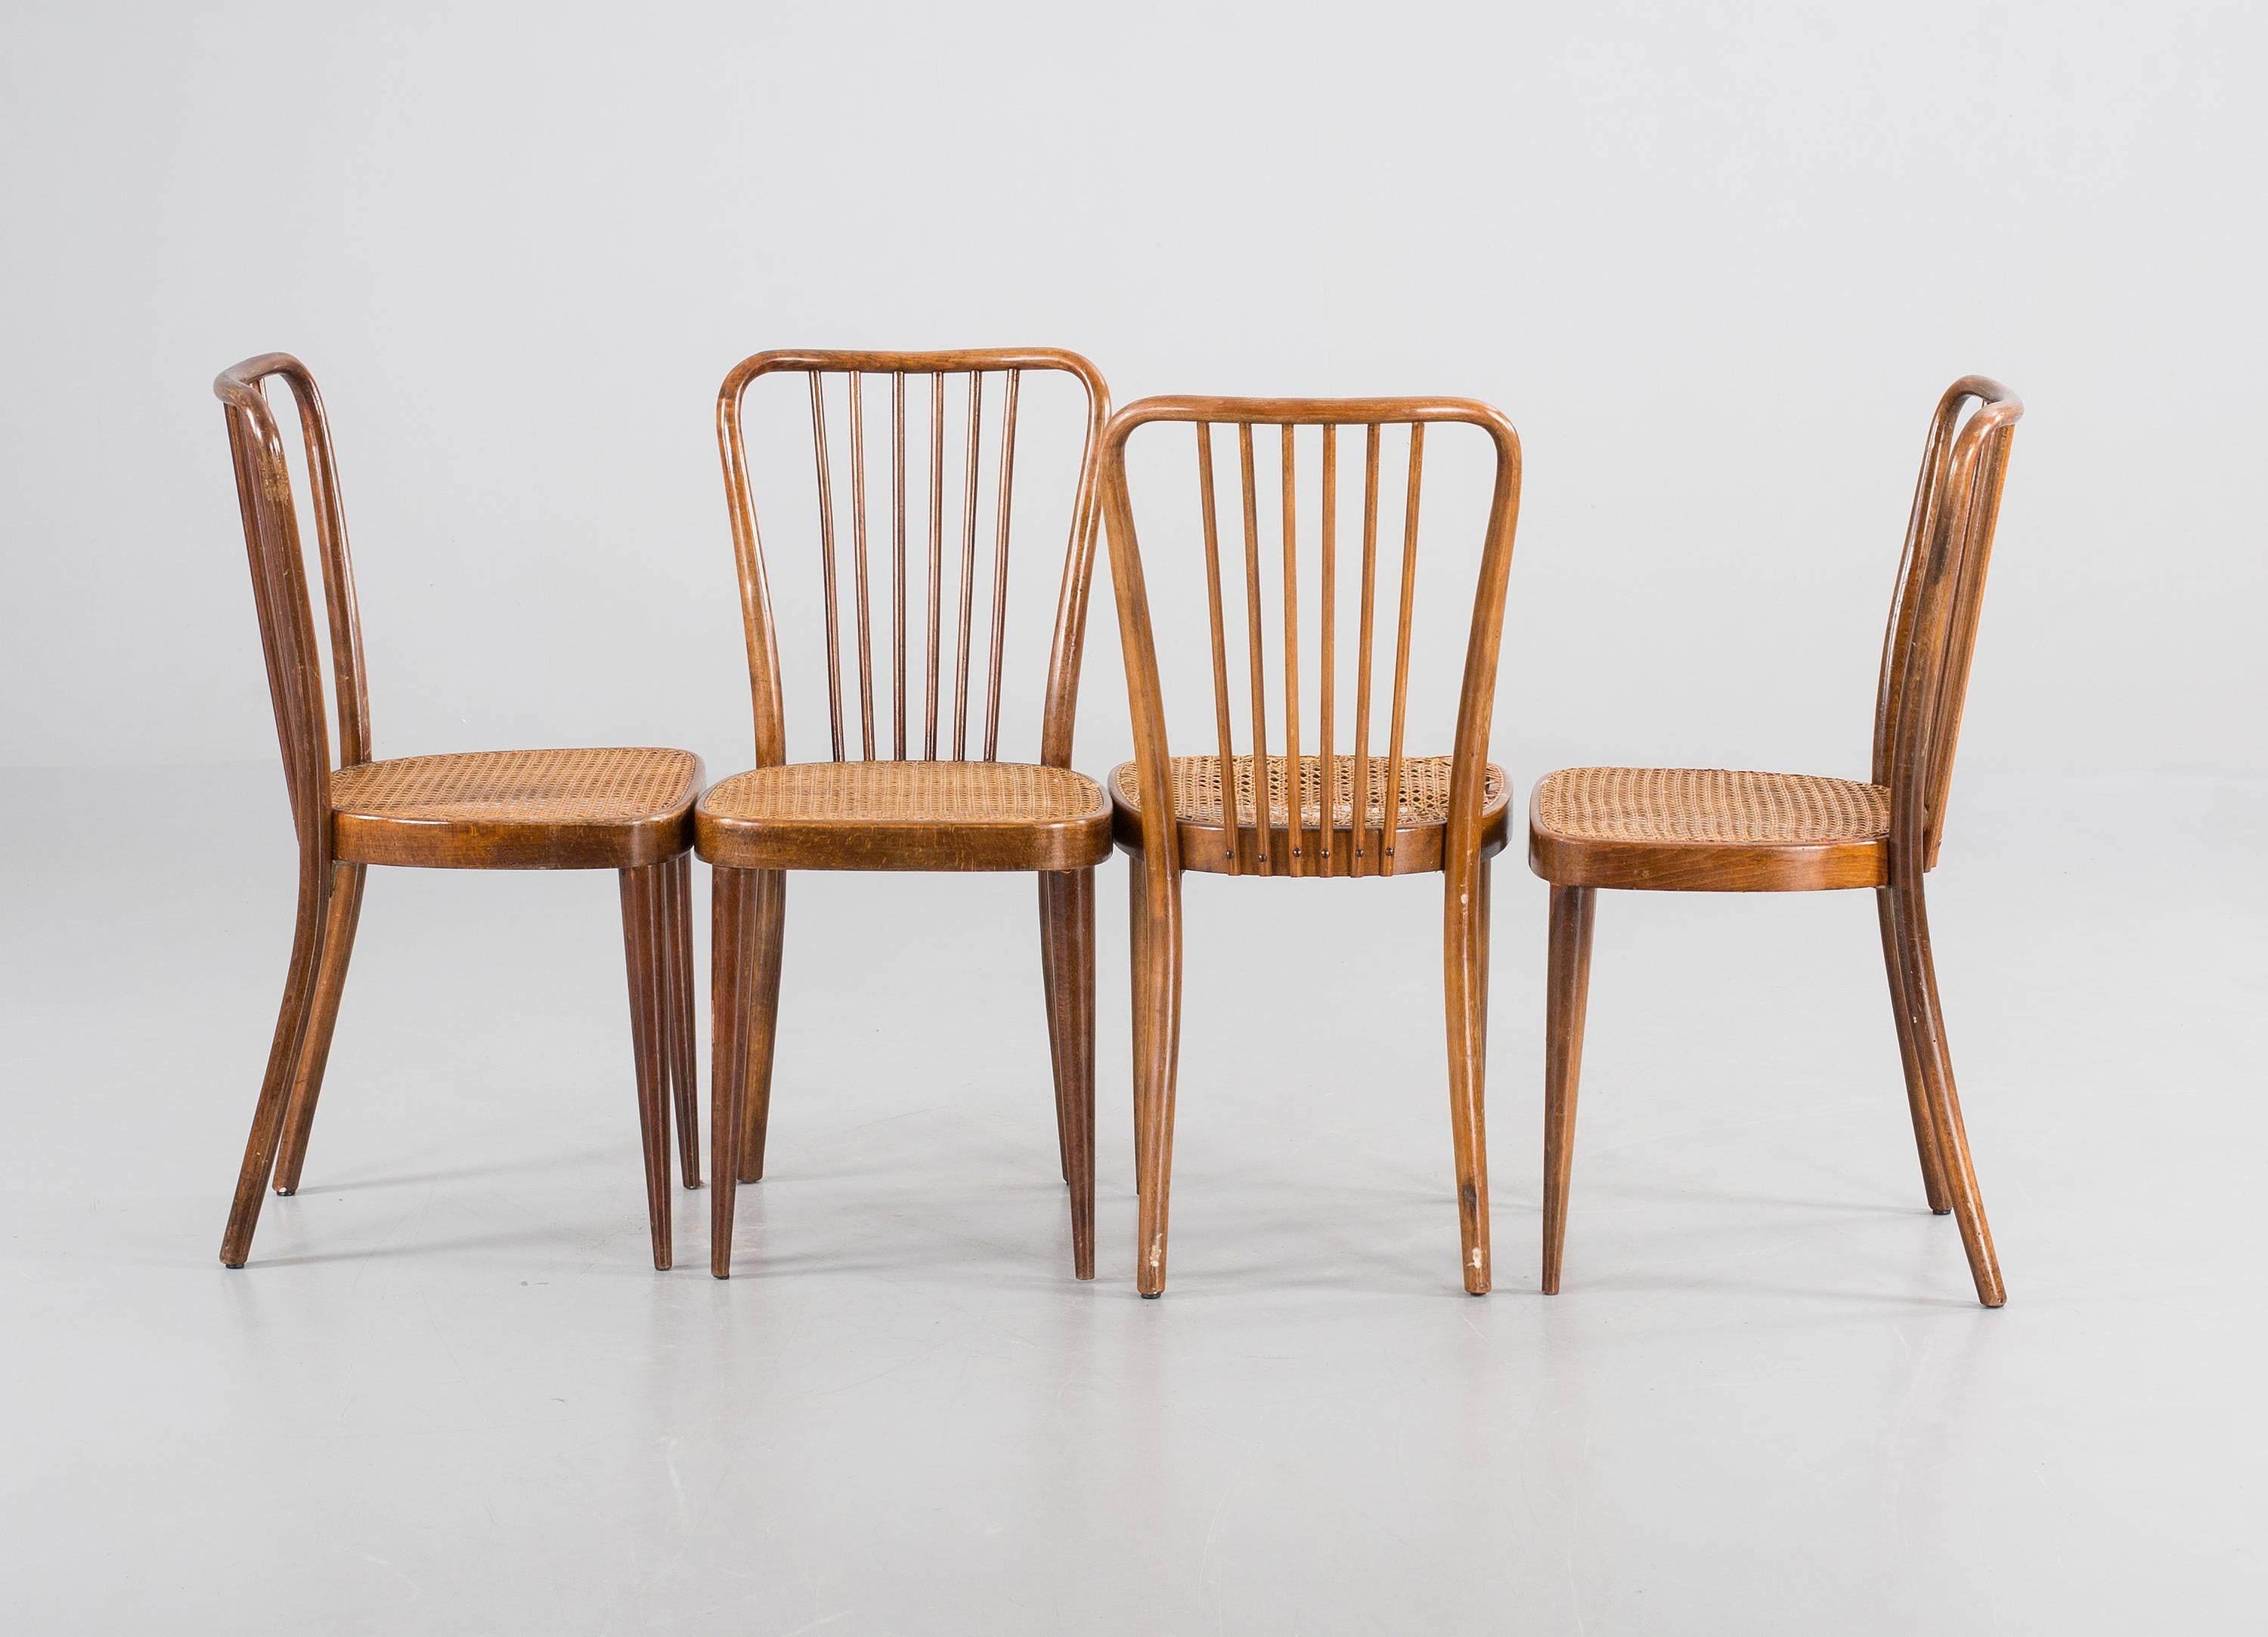 Bauhaus Set of Four Thonet Dining Chairs by Josef Frank